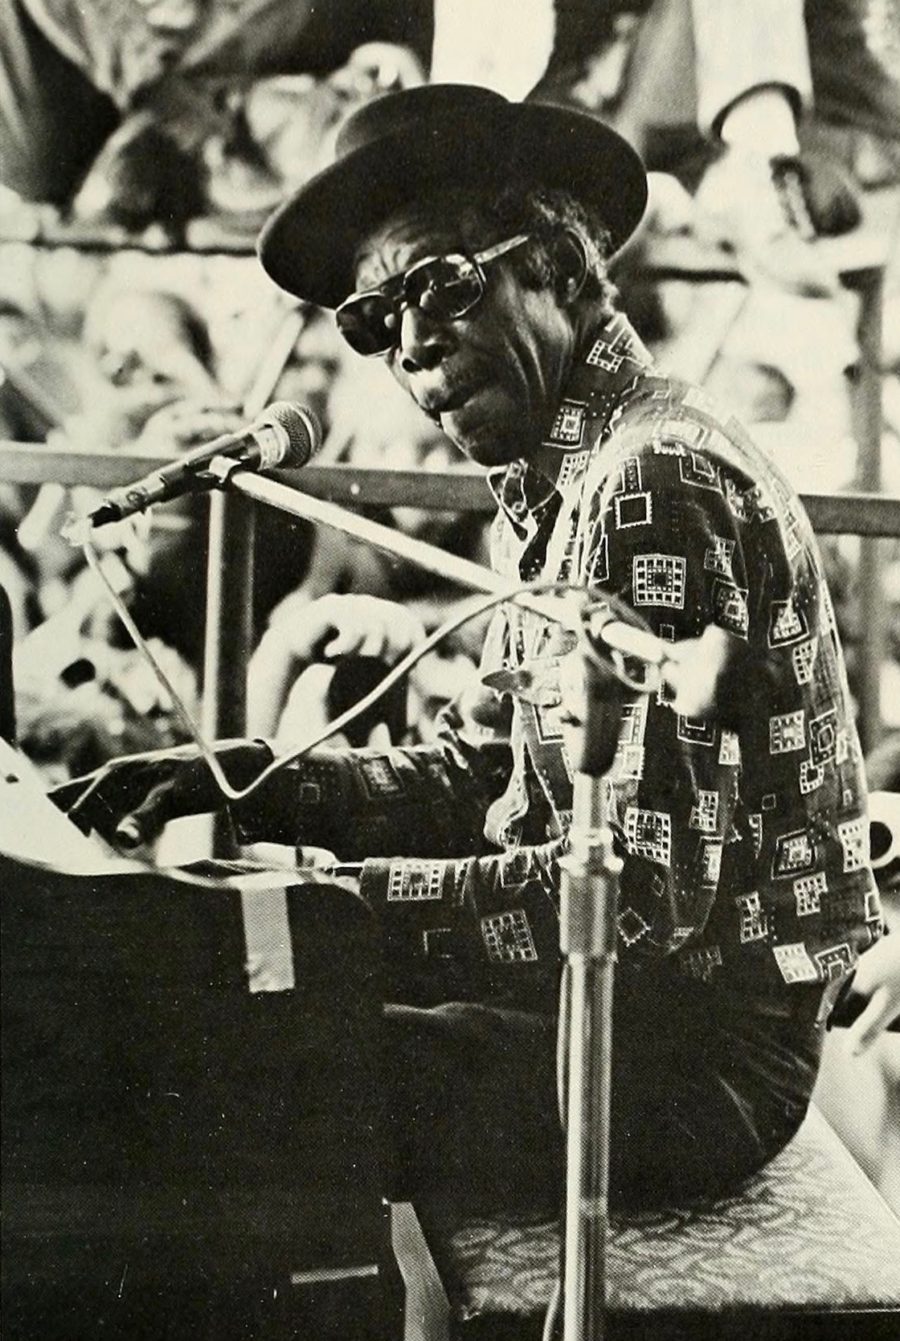 Professor Longhair playing piano at Jazz Fest 1975